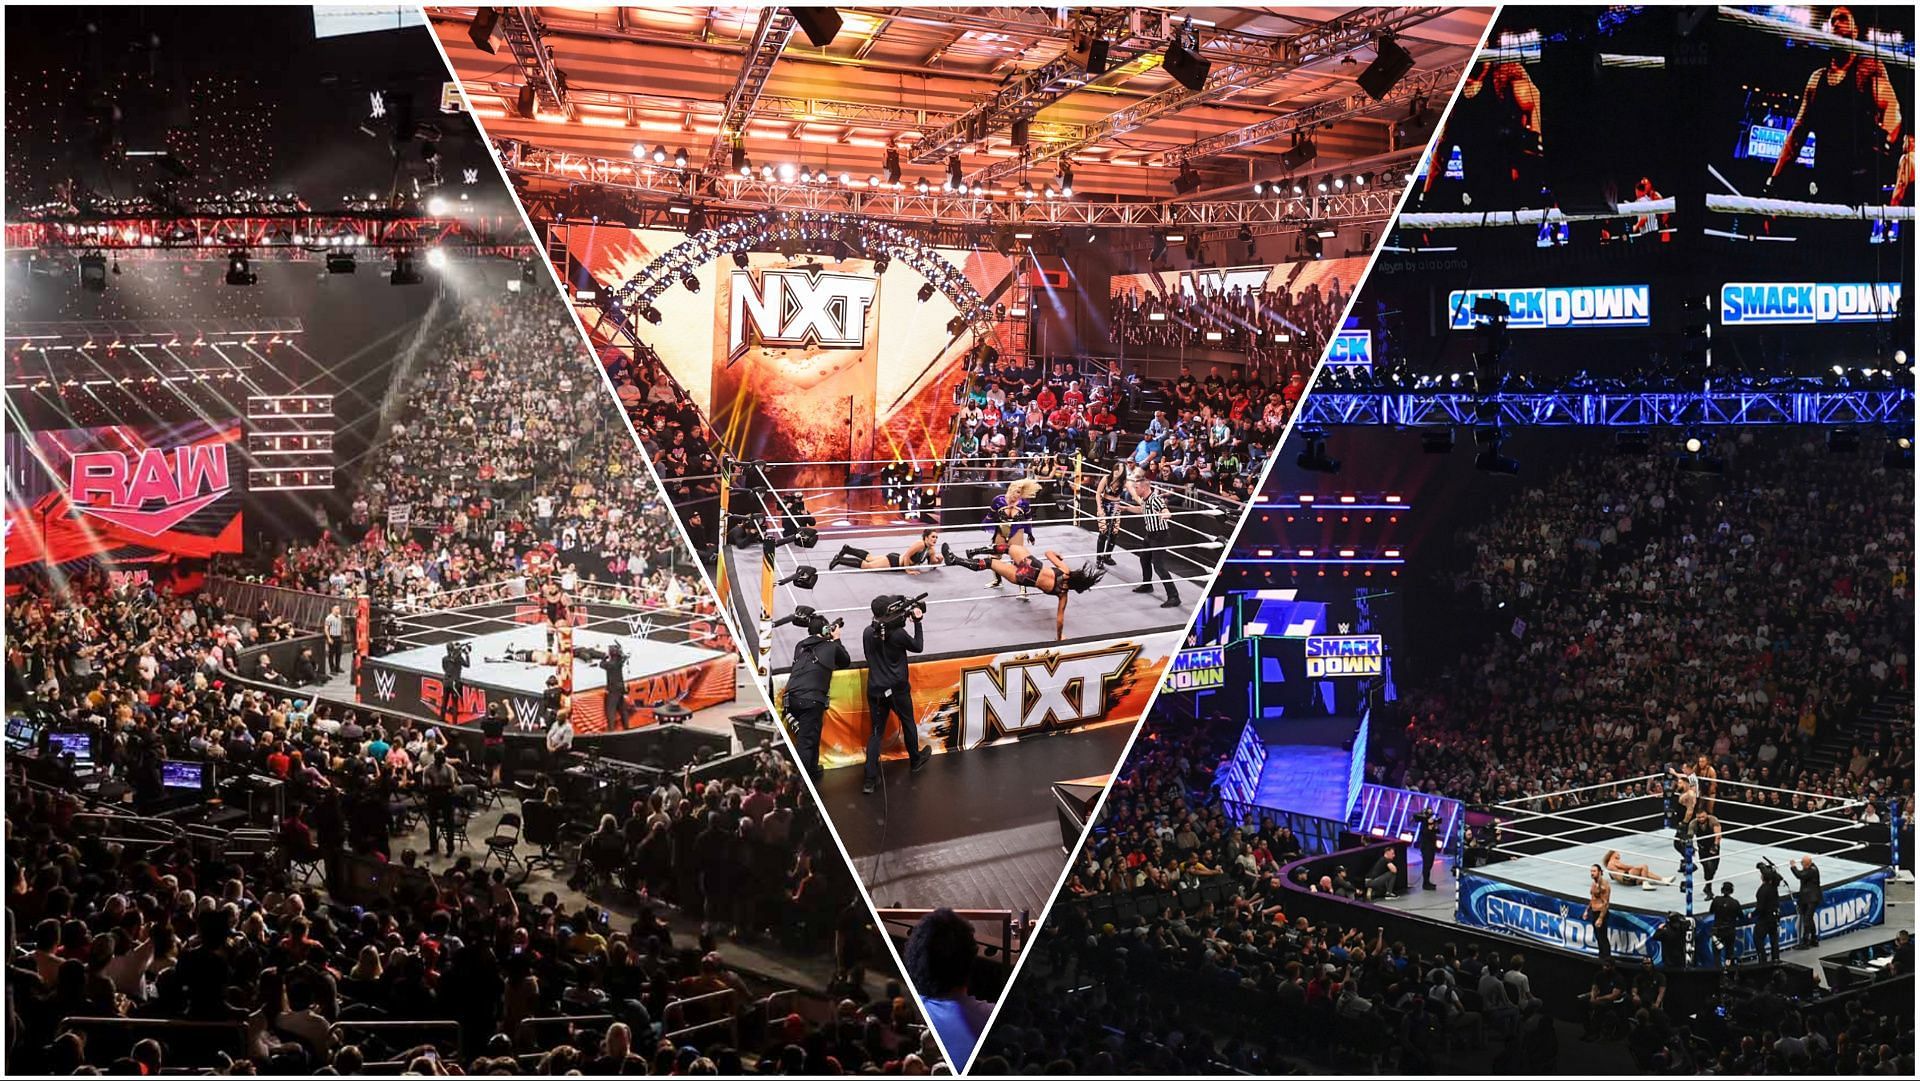 A look at the WWE sets for RAW, NXT, and SmackDown